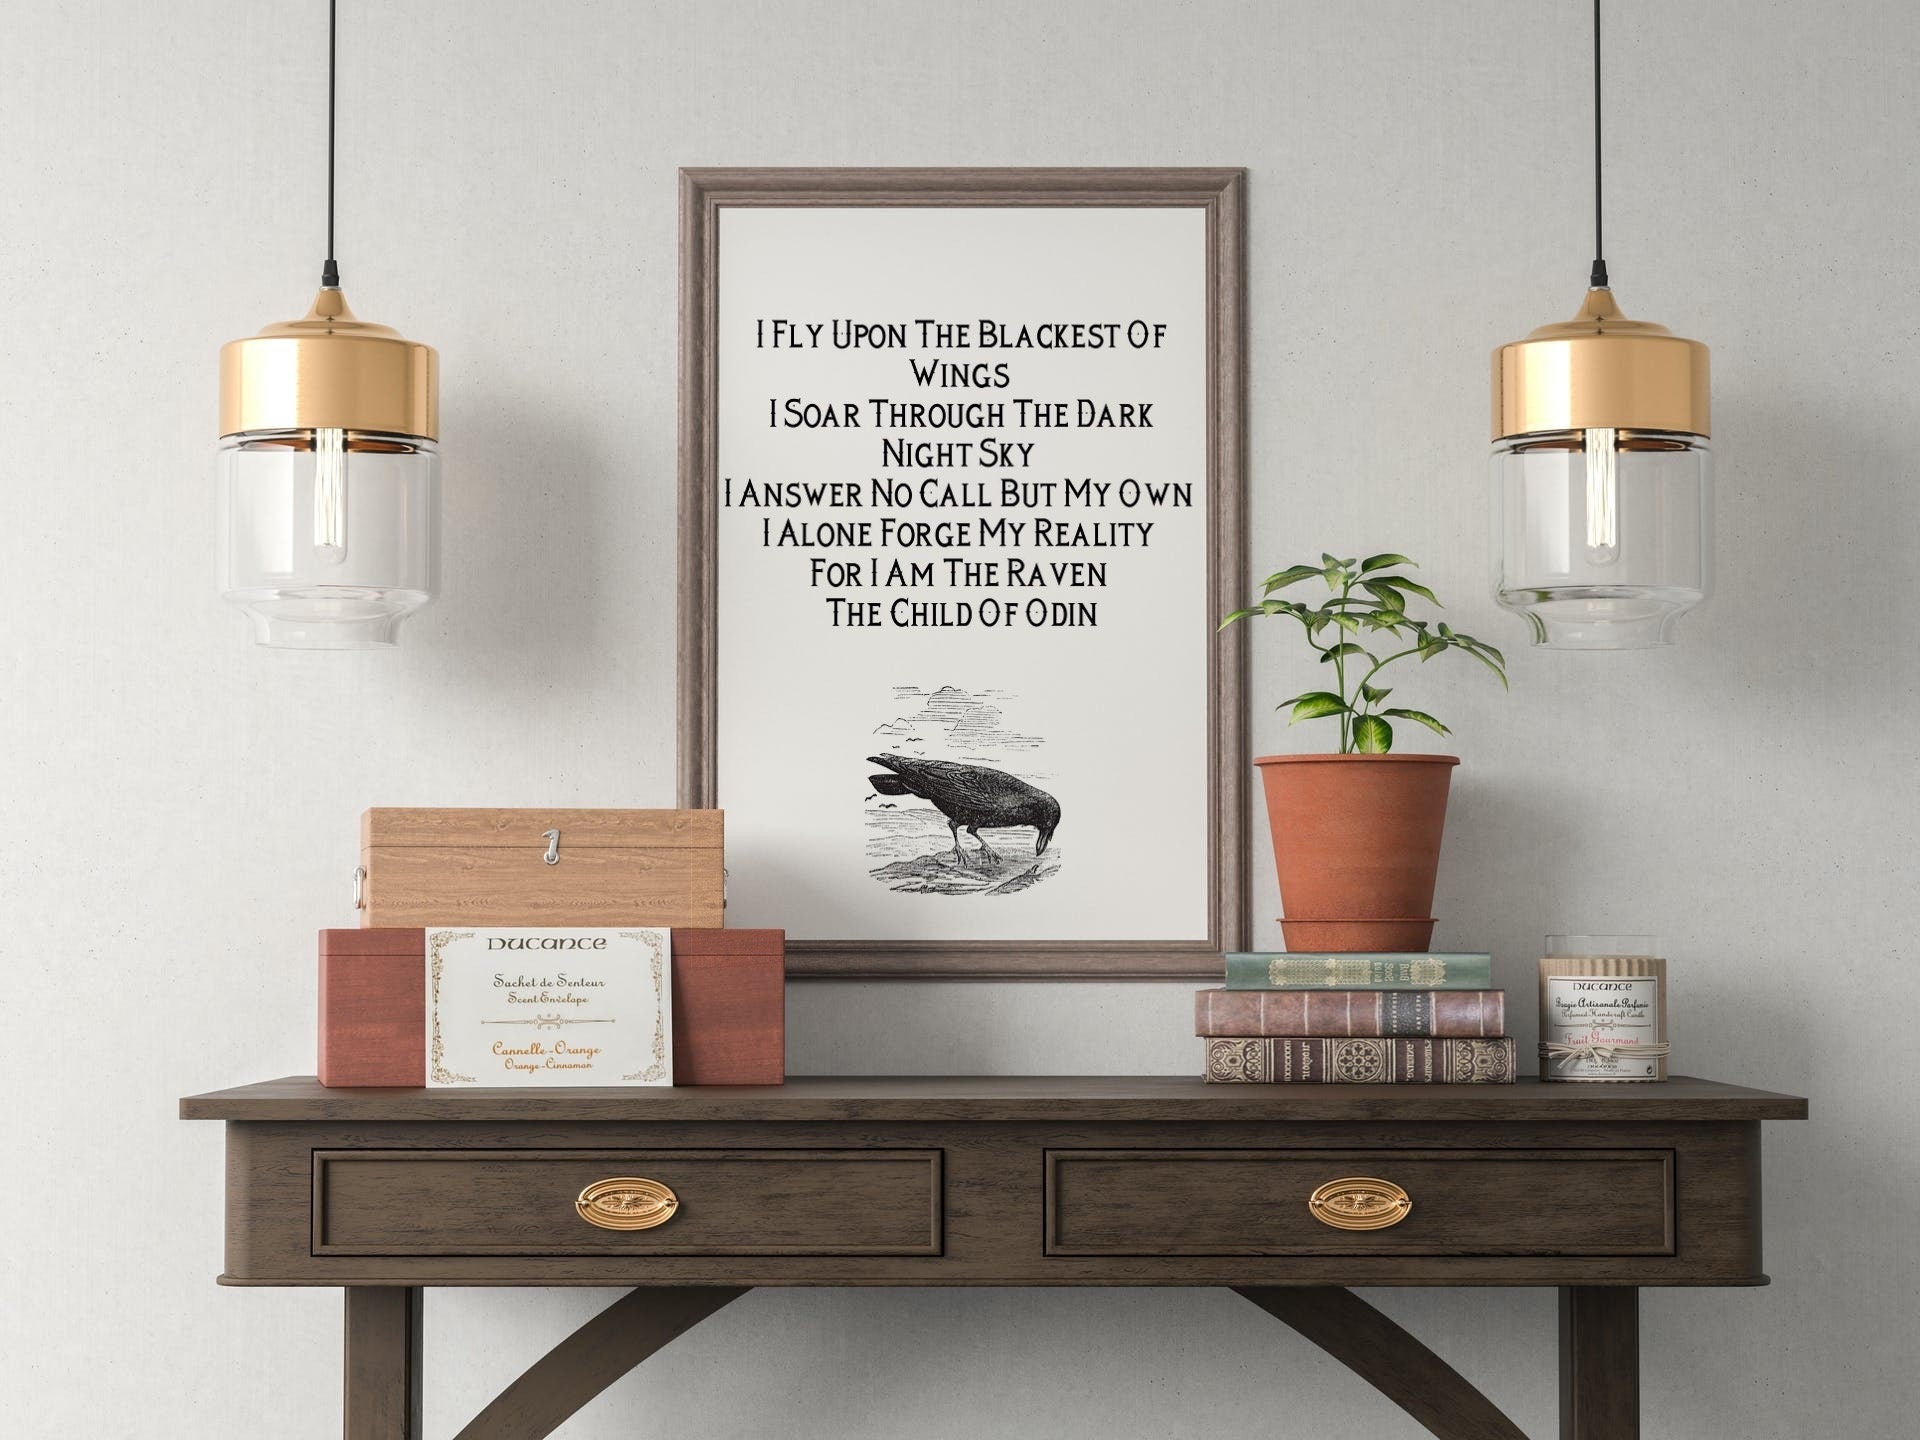 Norse Viking Poetry Child of Odin Wall Art Print, I Fly Upon The Blackest of Wings Unframed Black & White Art